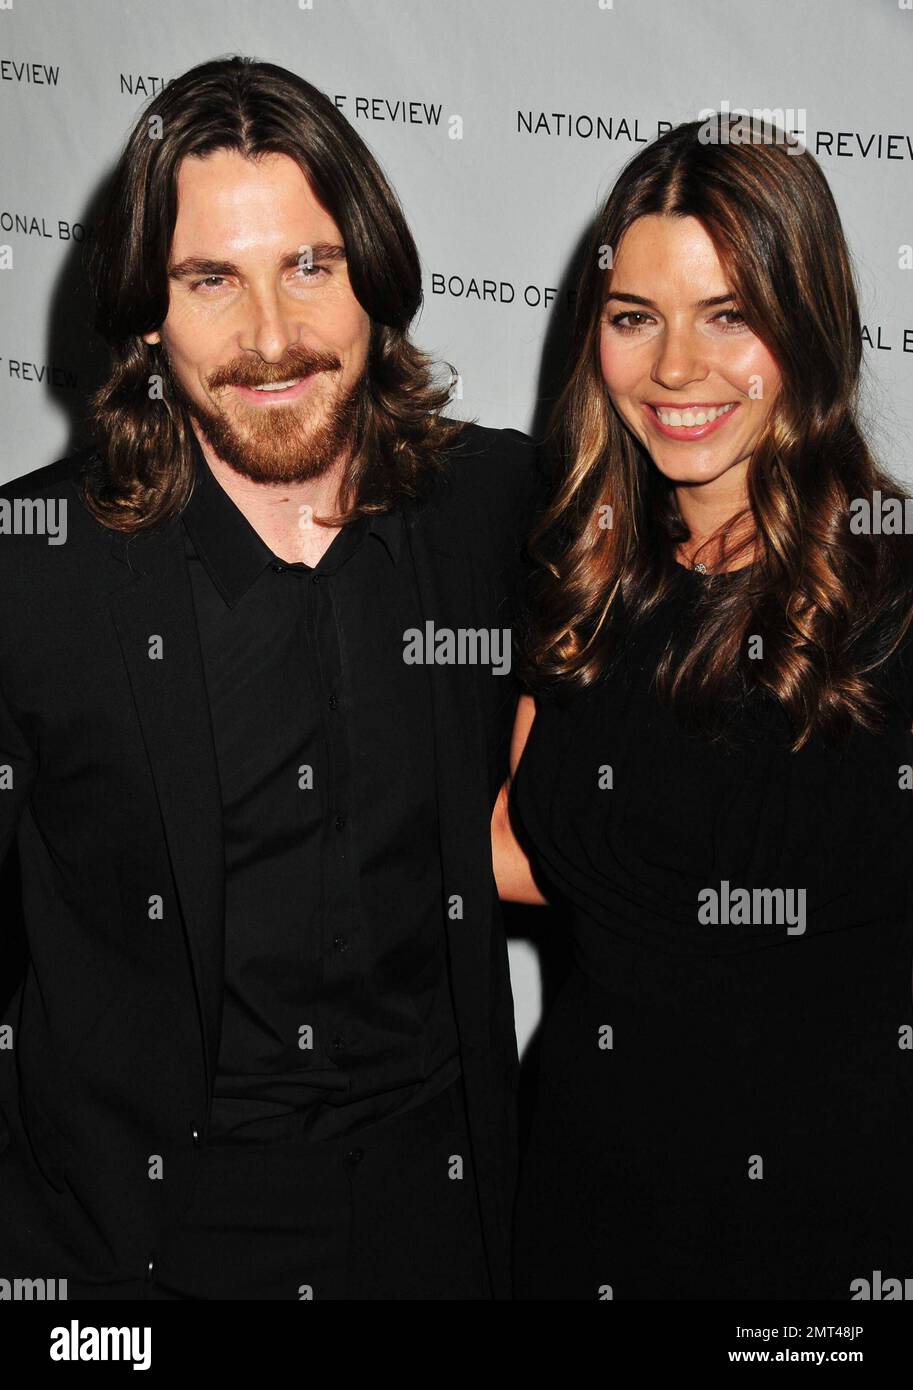 Showing off his growing hair Christian Bale arrives with his wife Sibi  Blazic at the 2011